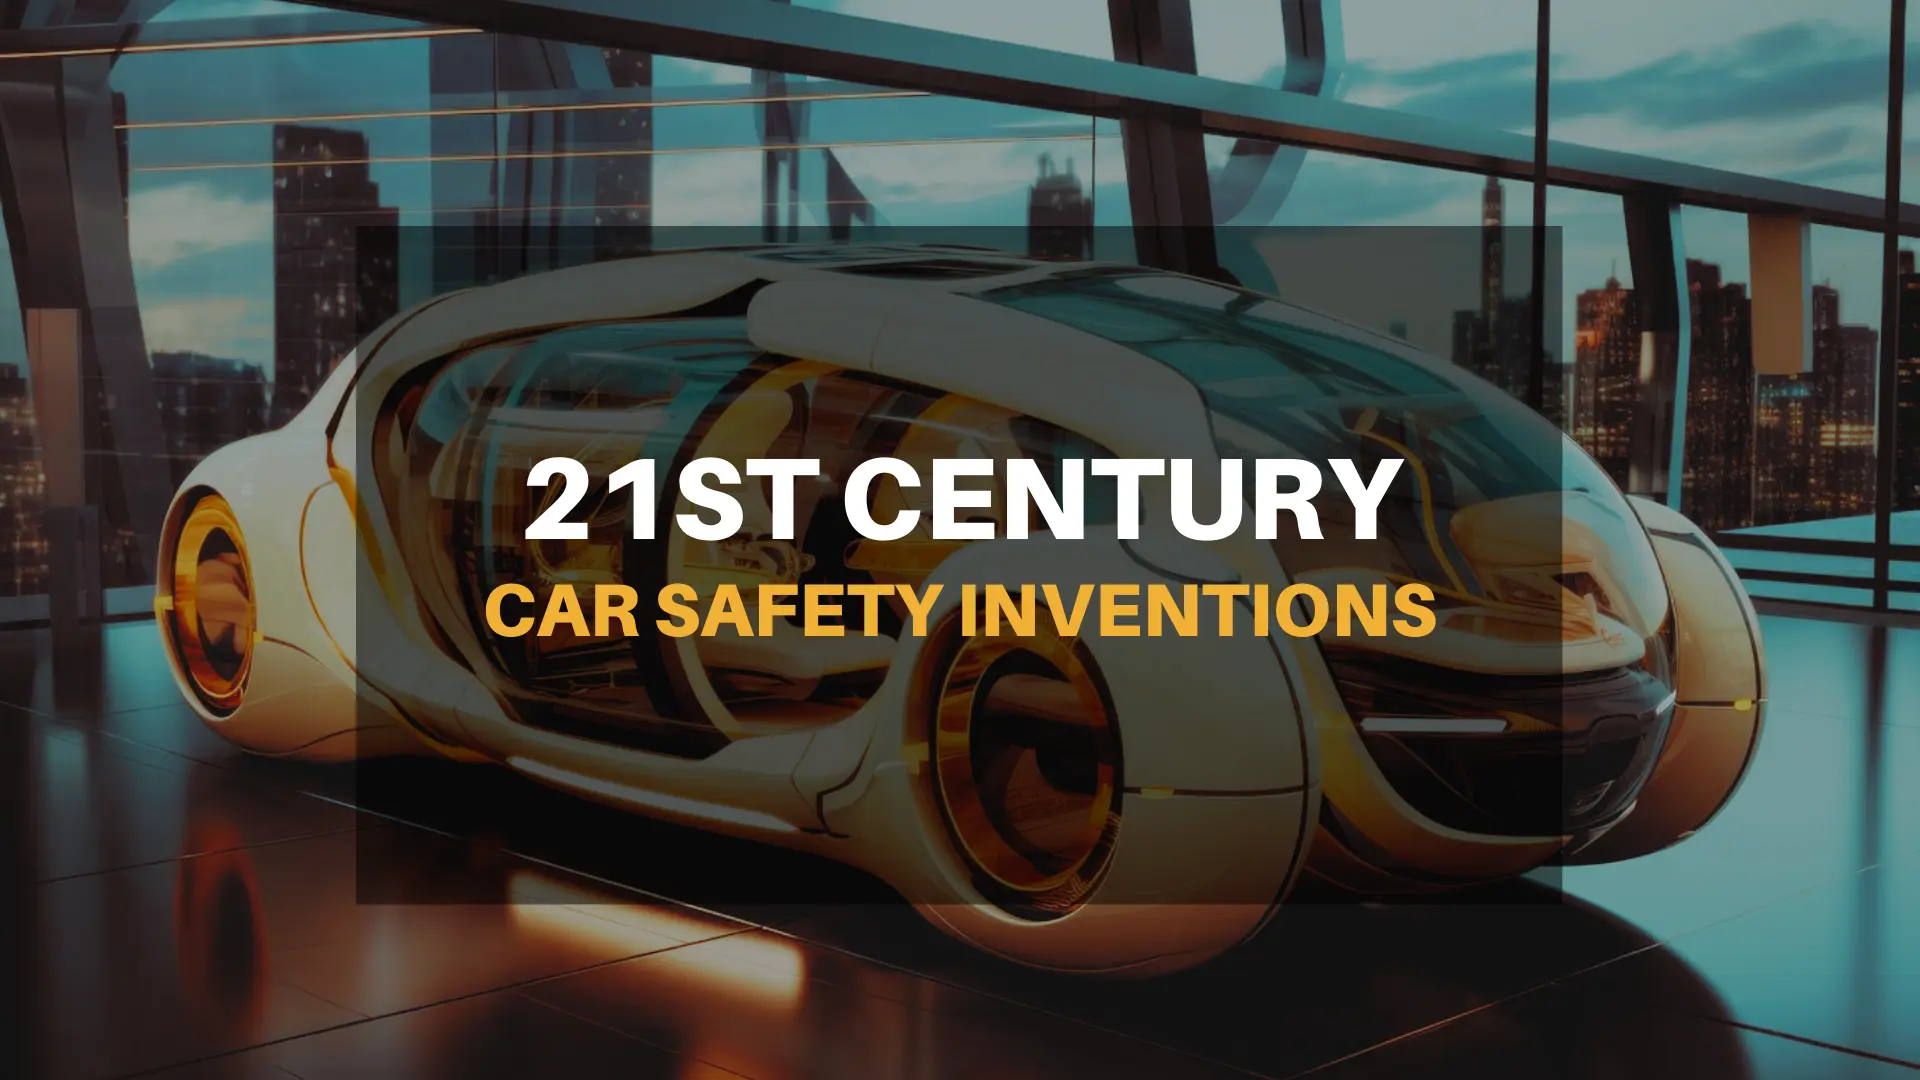 21st century car safety inventions